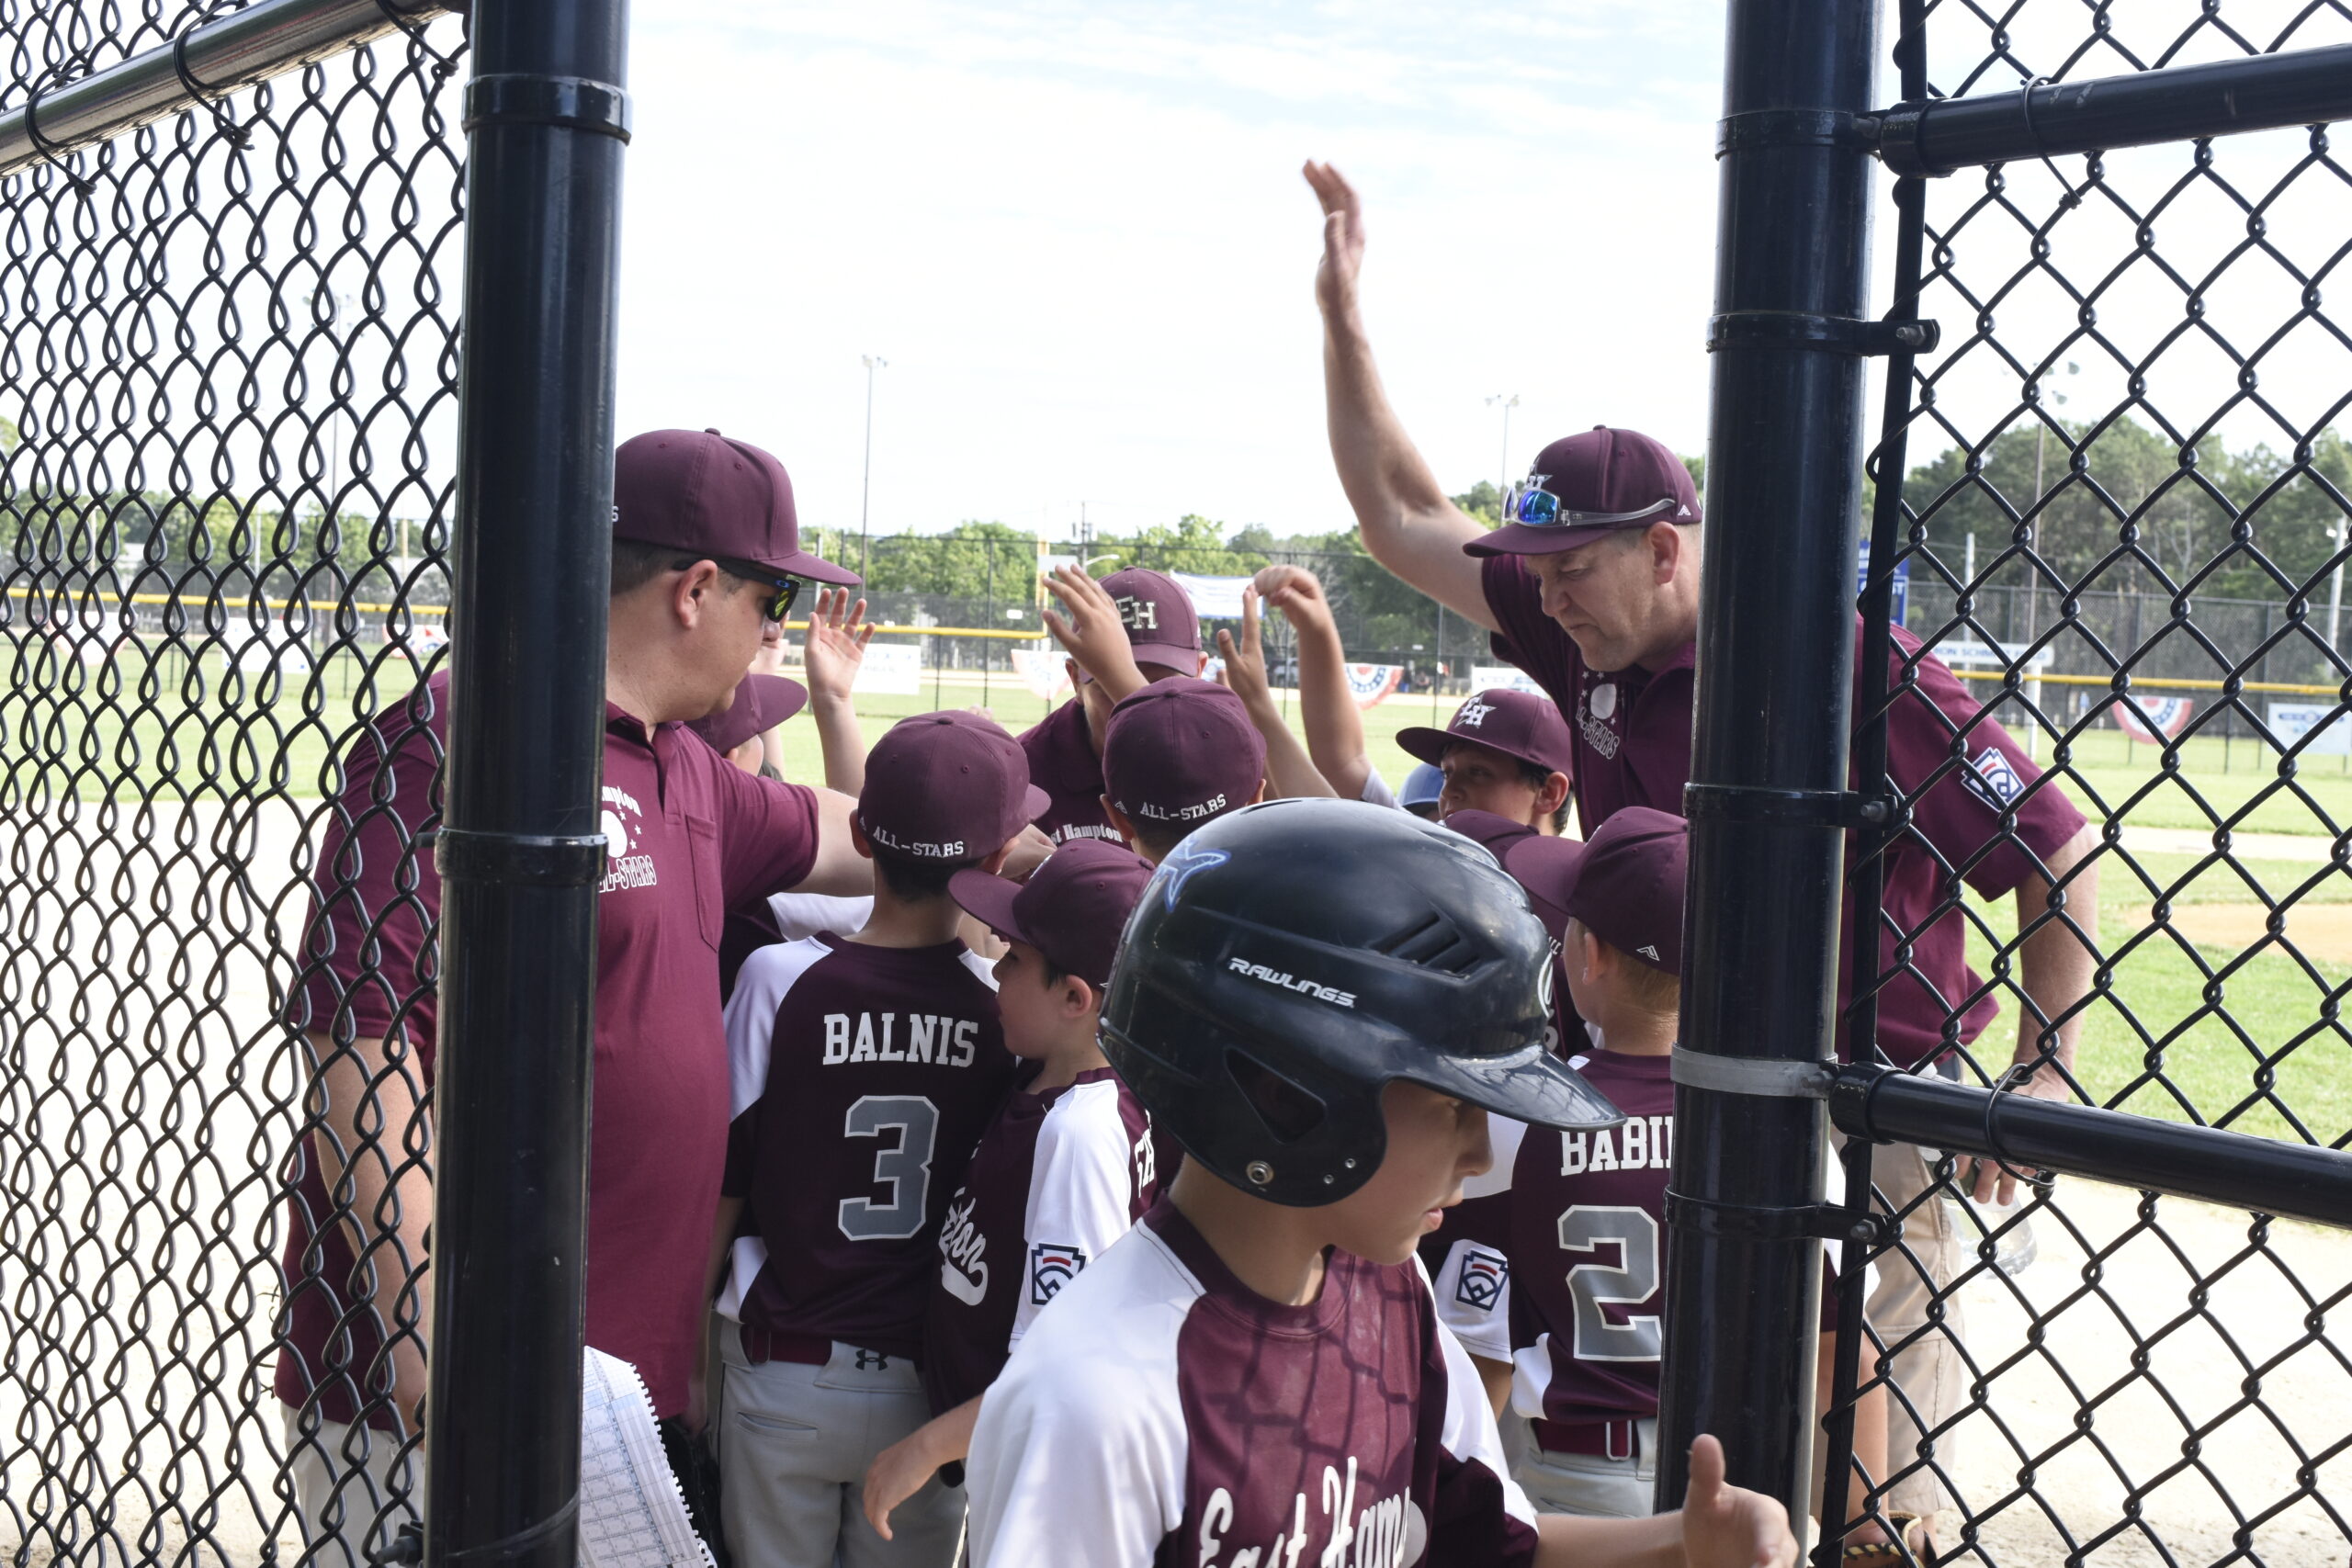 The East Hampton All-Stars are pumped up after taking a five-run lead to start last week's game.   DREW BUDD